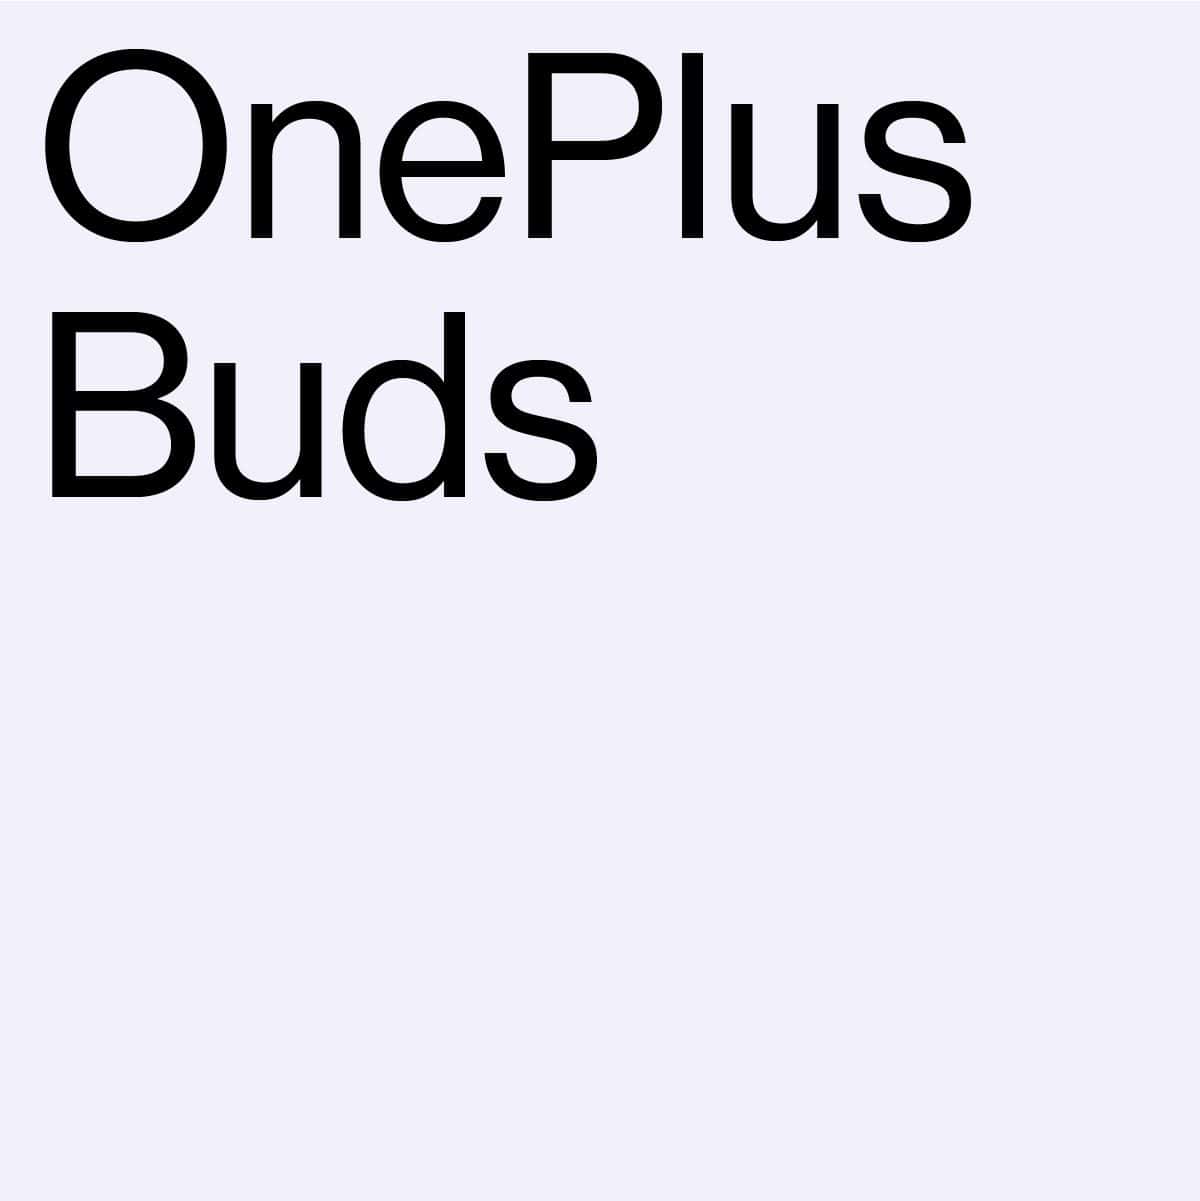 OnePlus Buds will charge faster than Apple AirPods, thanks to Warp Charge technology